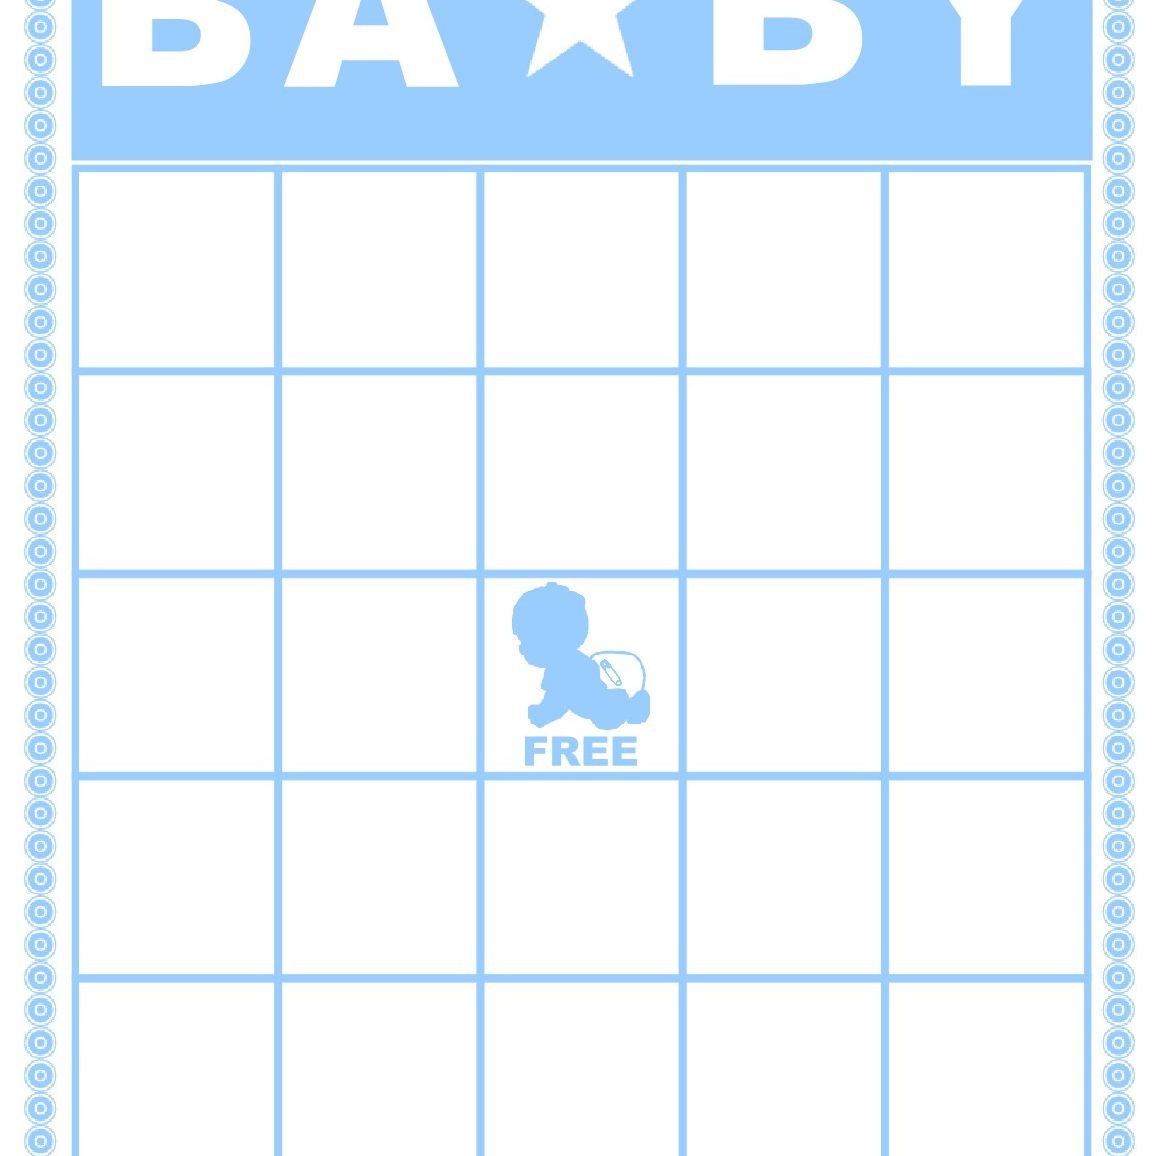 Free Baby Shower Bingo Cards Your Guests Will Love - Free Printable Baby Shower Bingo Cards